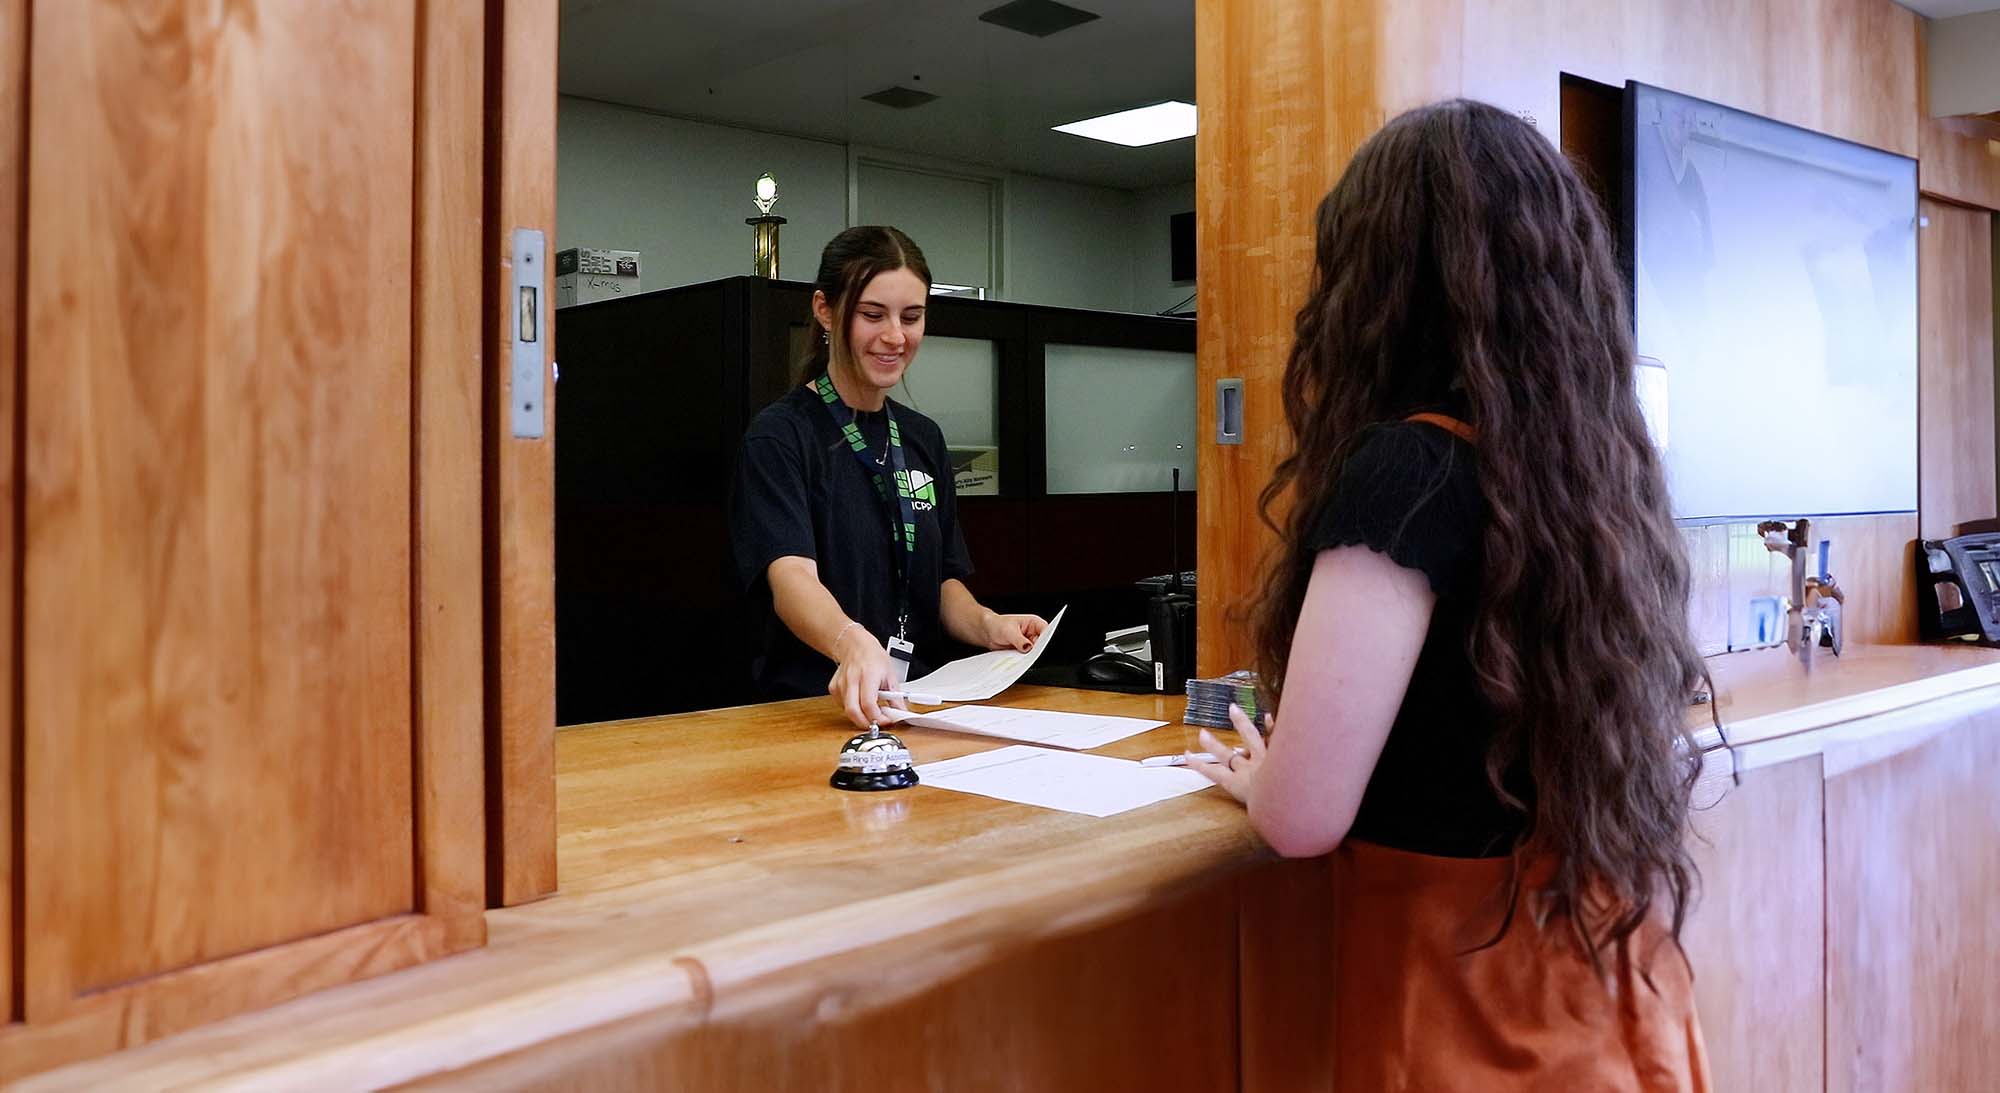 Staff member assisting a student at the Financial Services window